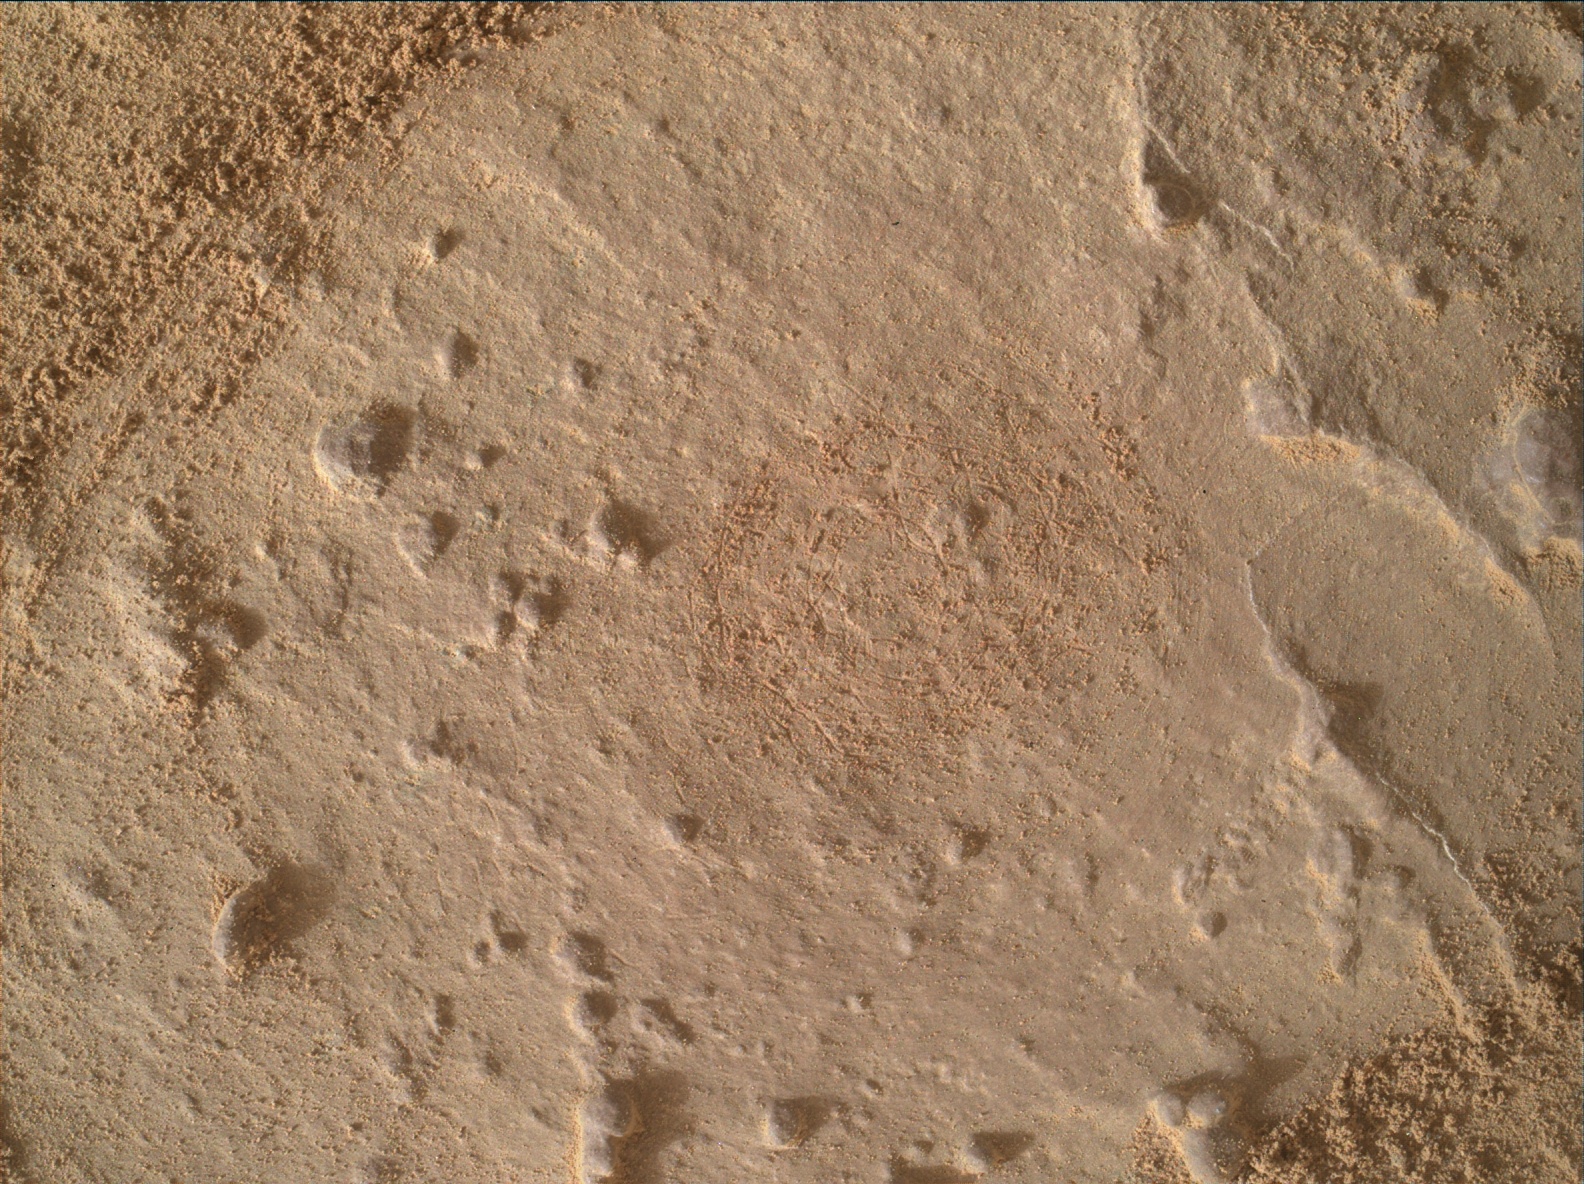 Nasa's Mars rover Curiosity acquired this image using its Mars Hand Lens Imager (MAHLI) on Sol 1445